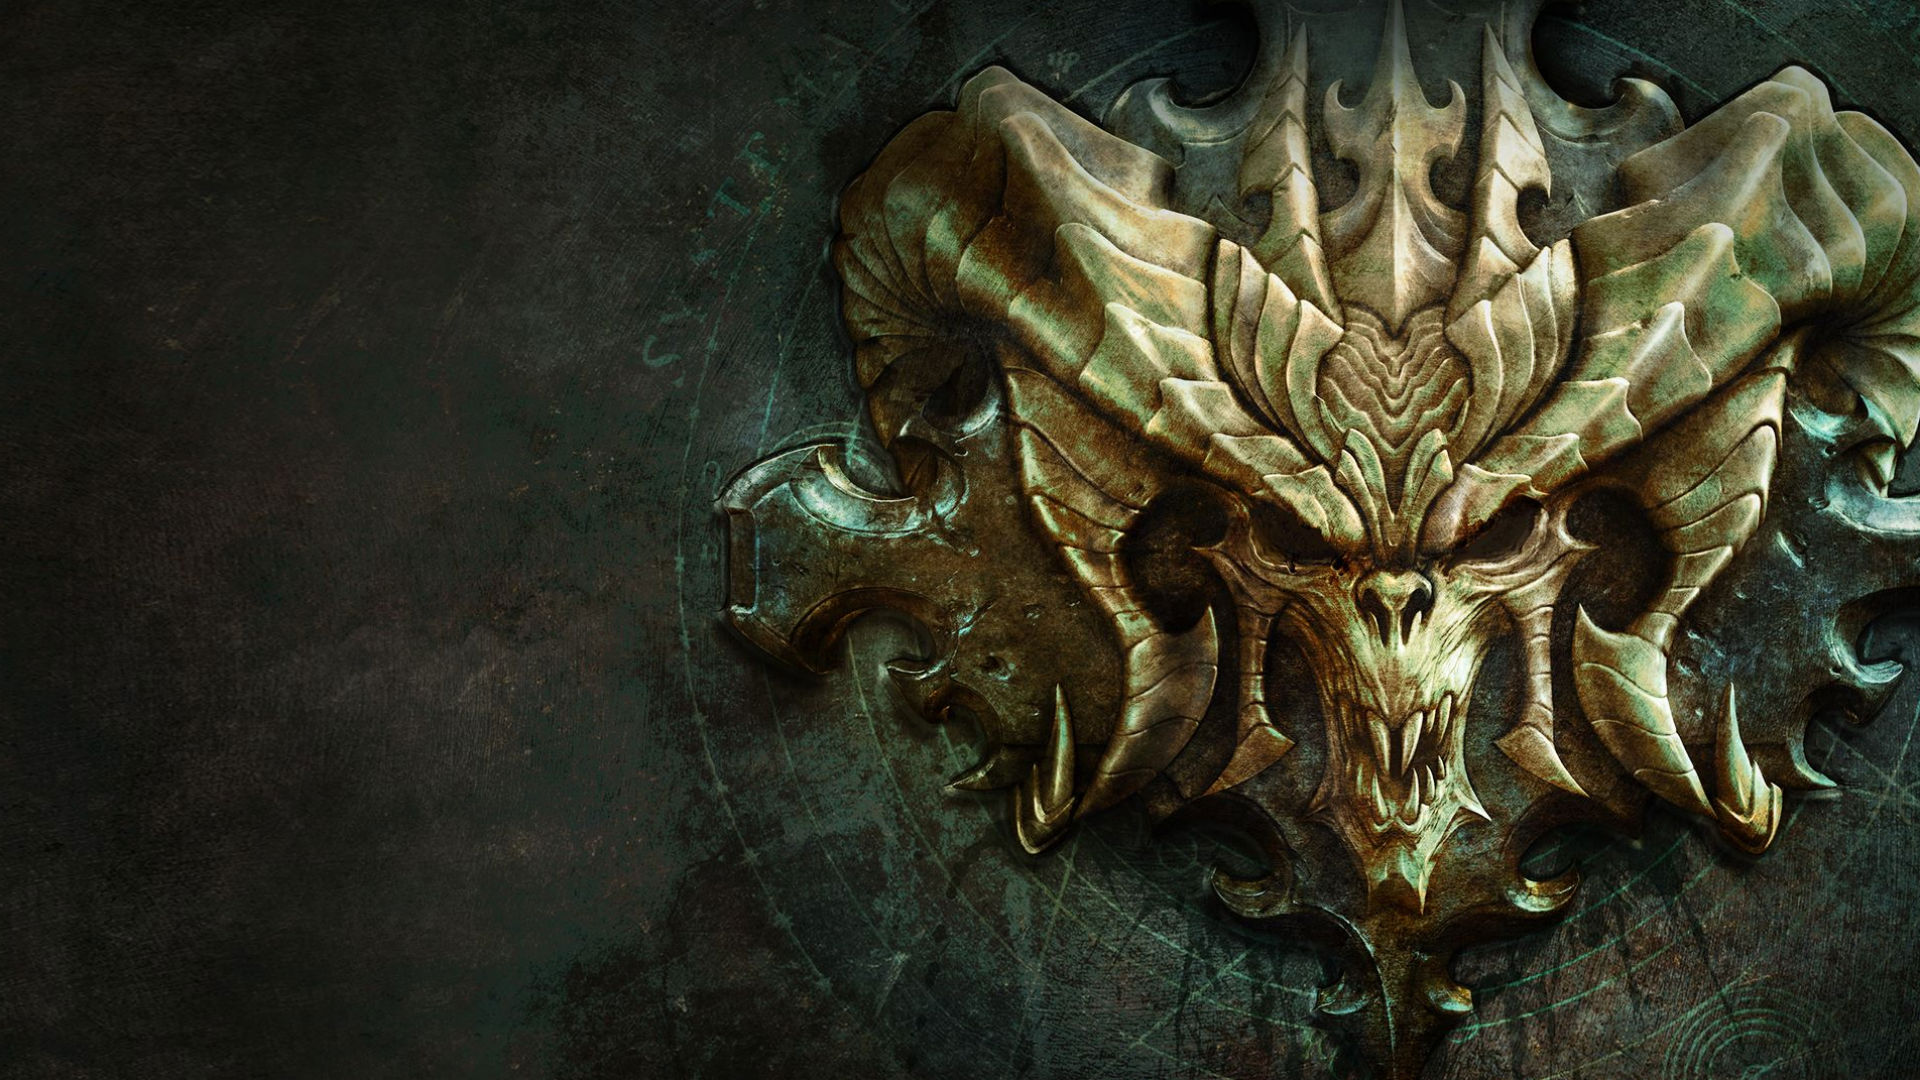 What's been going on with Diablo 4? Here's the complete story so far